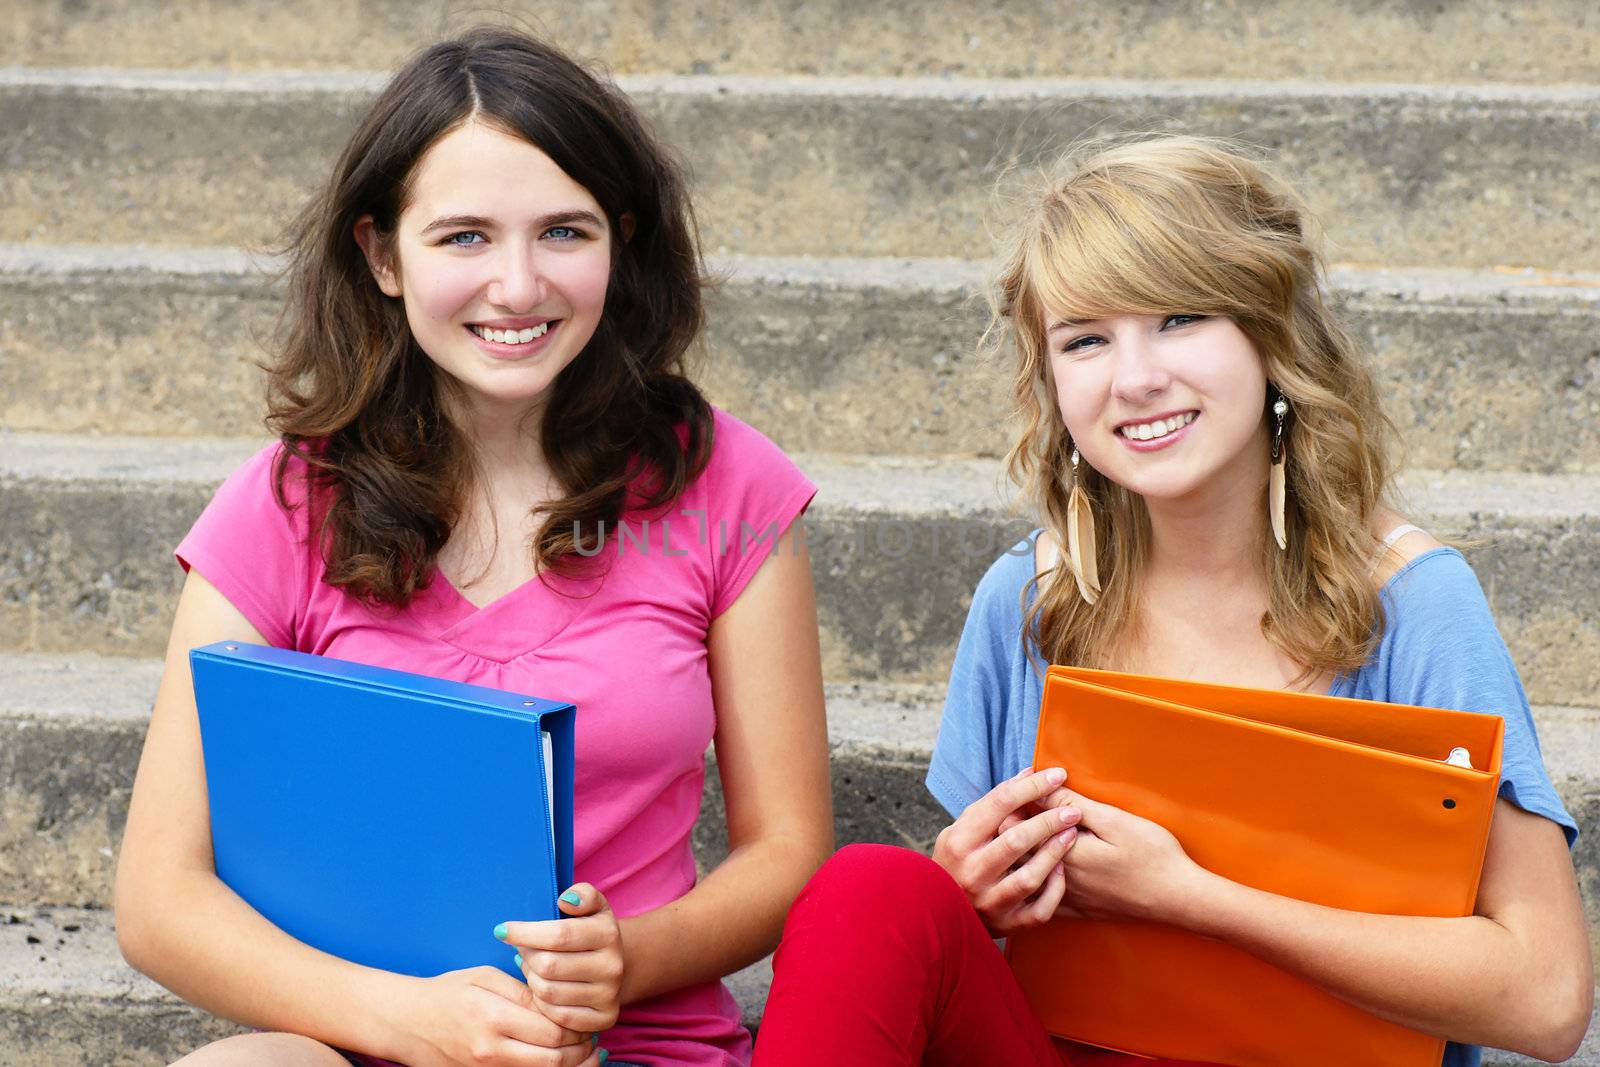 Two girl students at school smiling by Mirage3